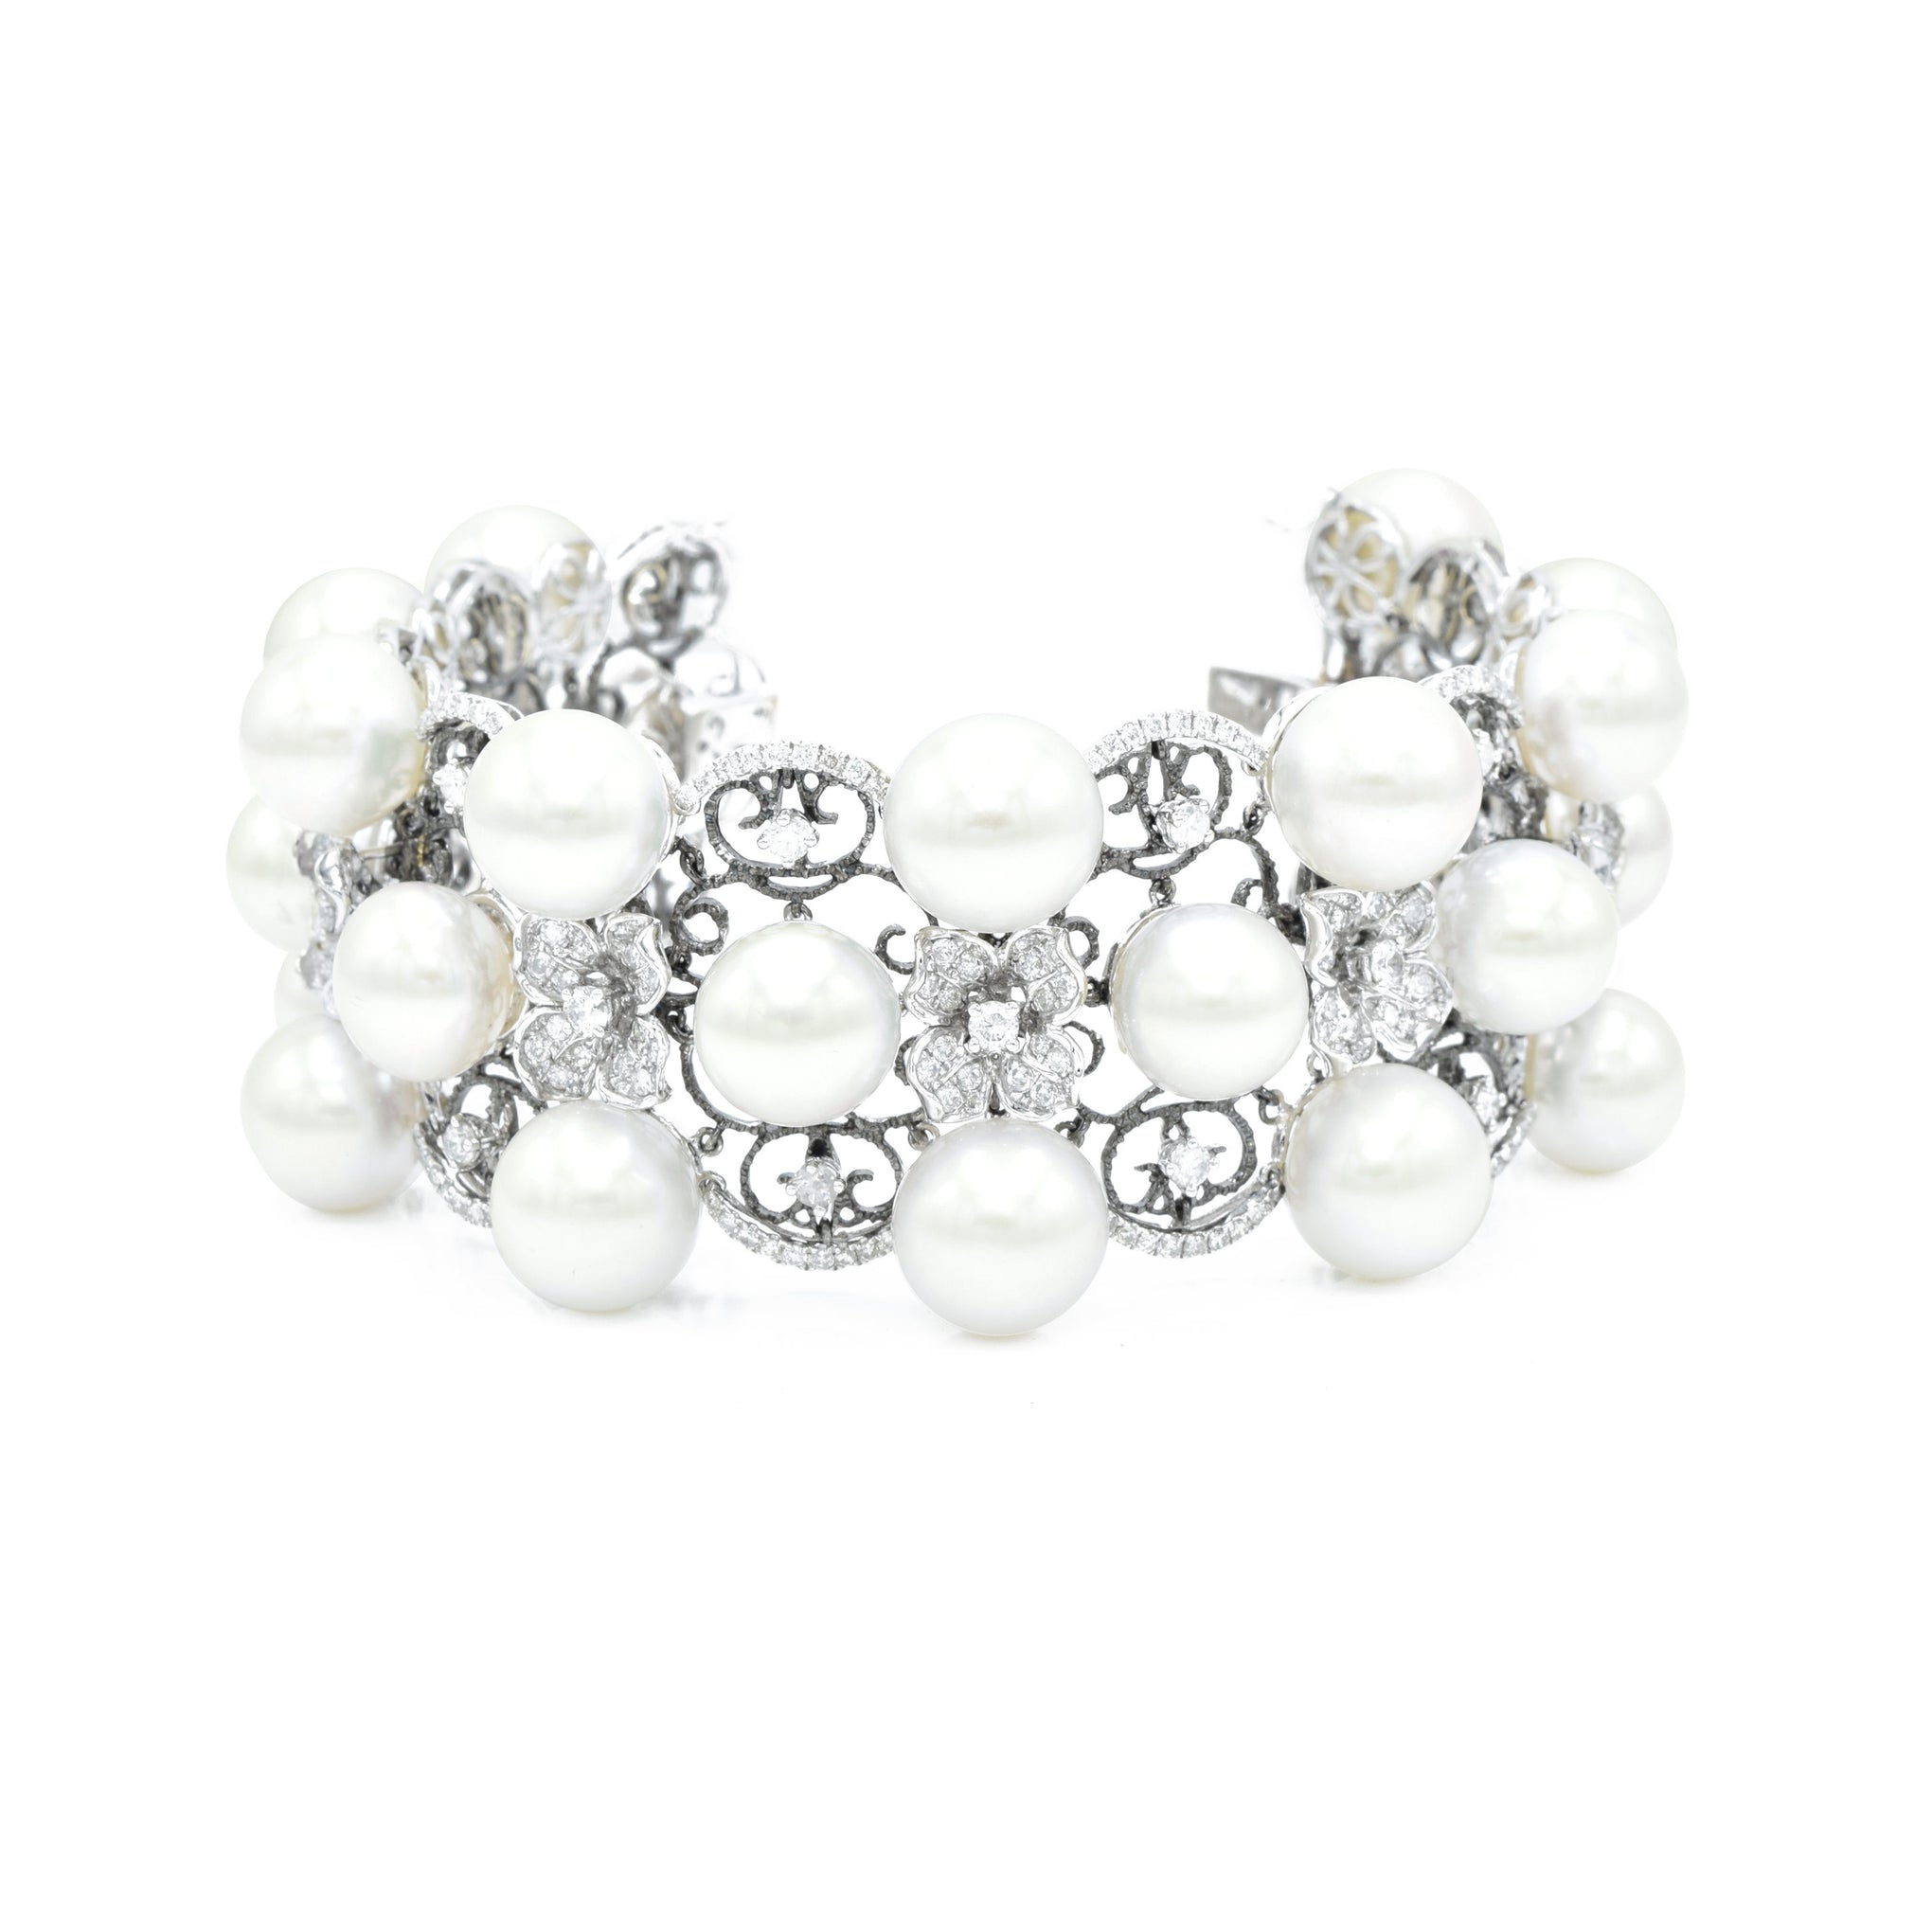 18kt White Gold, South Sea Pearl, and Diamond Three Row Bracelet with Flowers